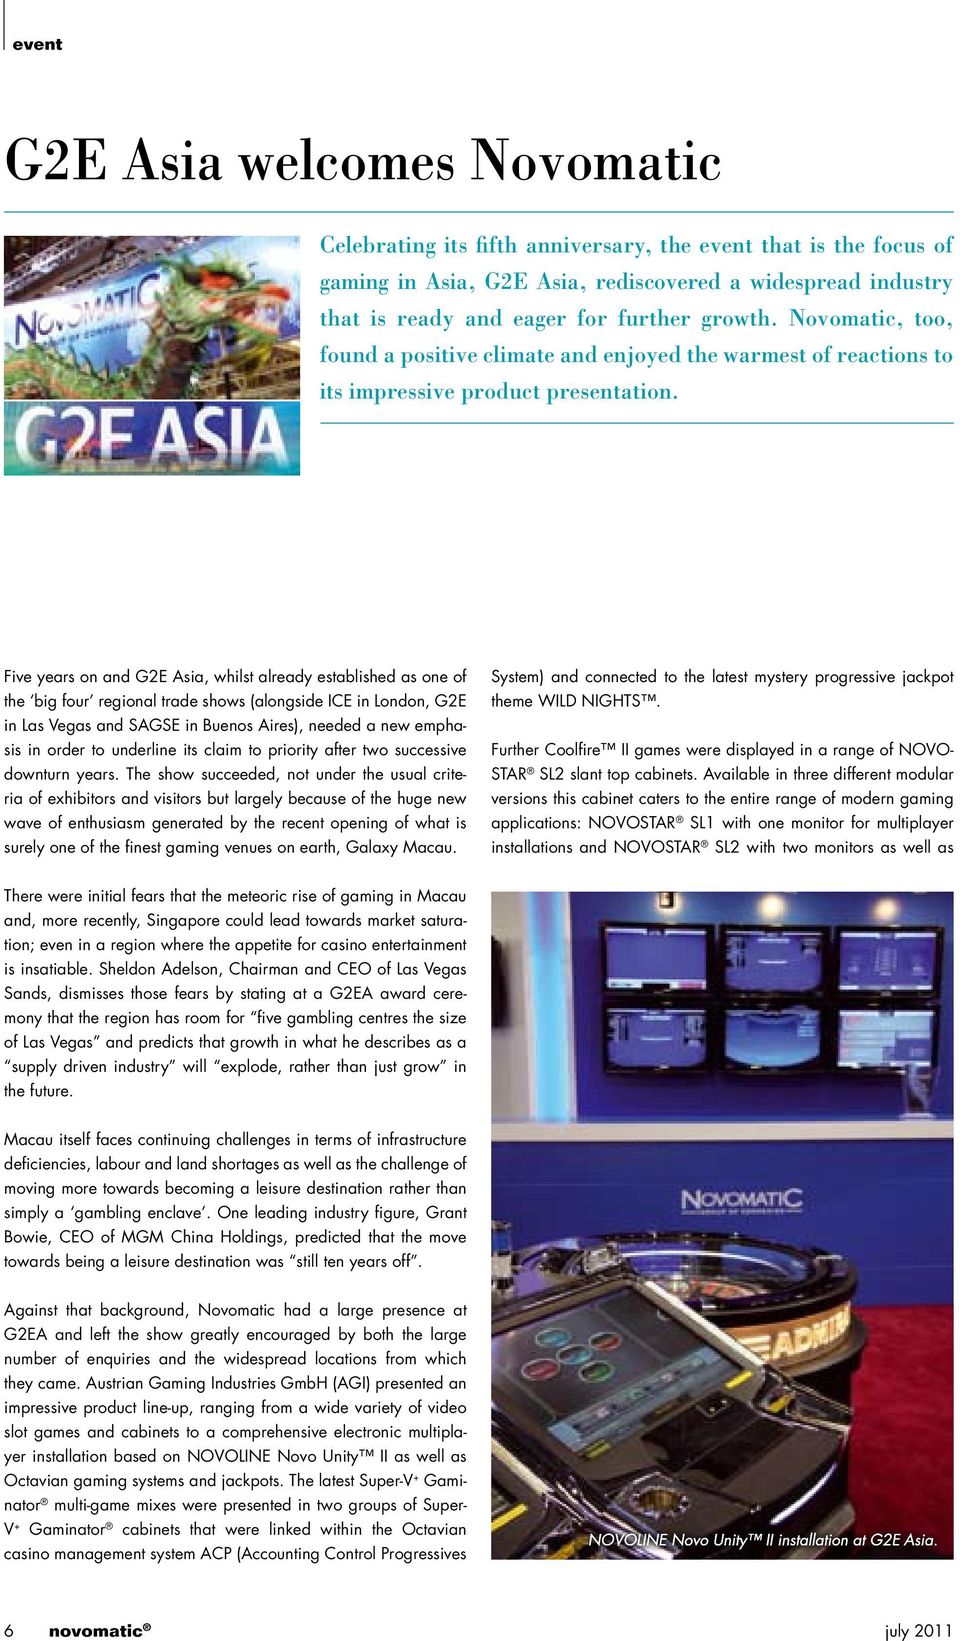 Five years on and G2E Asia, whilst already established as one of the big four regional trade shows (alongside ICE in London, G2E in Las Vegas and SAGSE in Buenos Aires), needed a new emphasis in